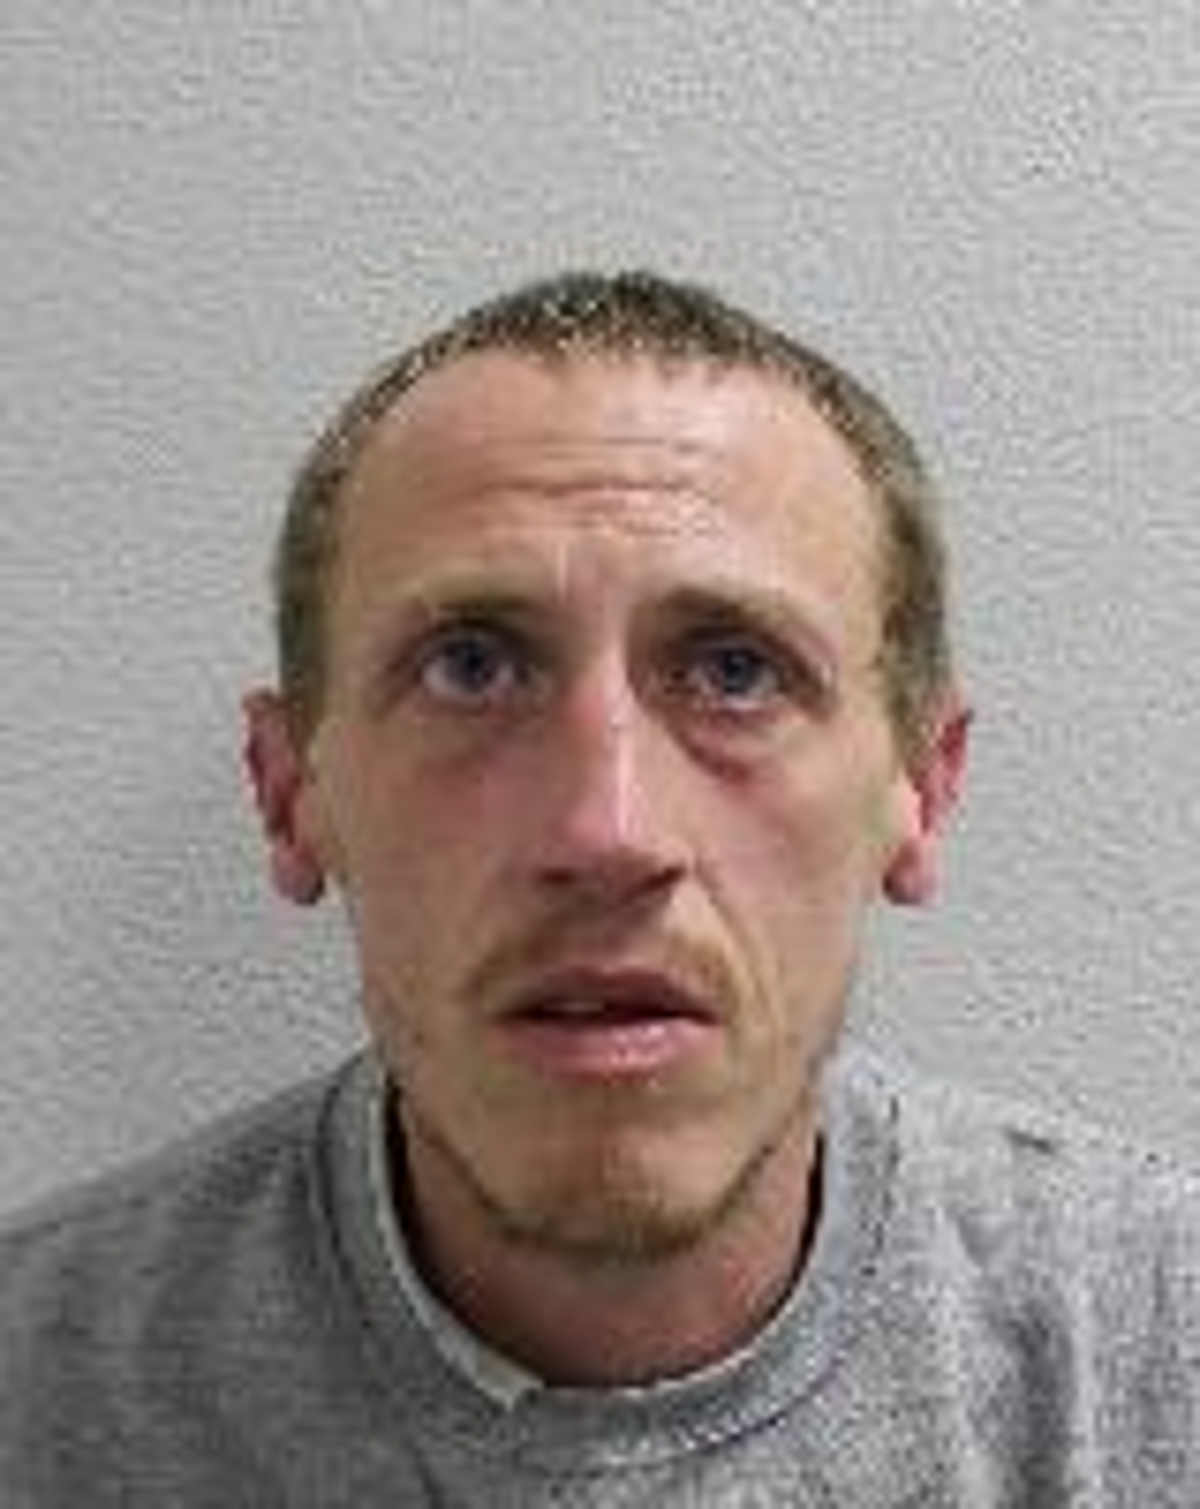 Serial burglar who preyed on elderly finally caught and jailed thanks to fingerprints on box of alcohol